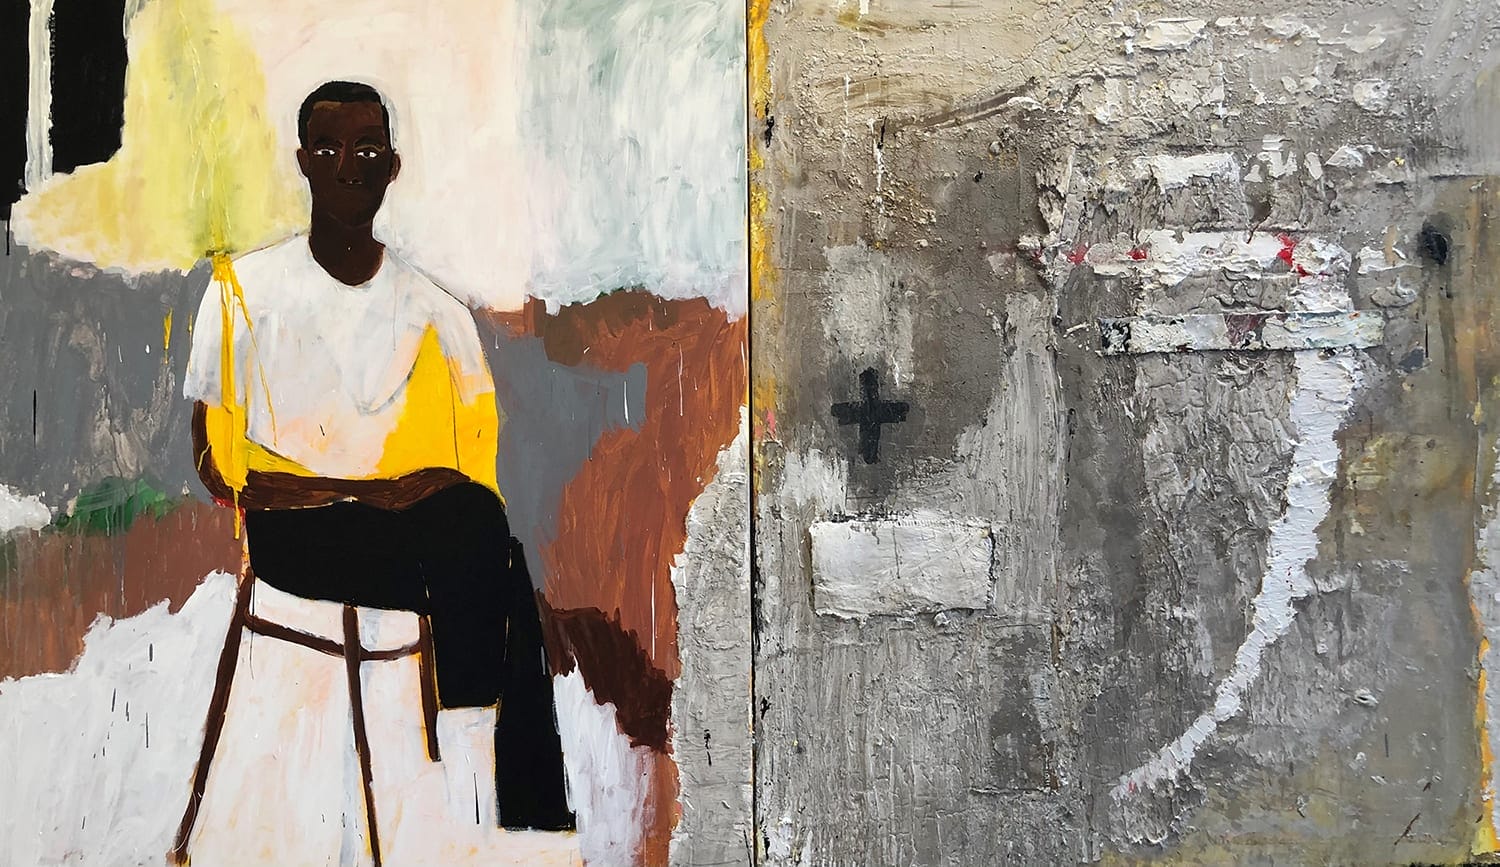 Patrick Eugene, You Ask About The Scars (2020) 72”x120” Mixed media on canvas, Courtesy of the artist and Gallery 1957